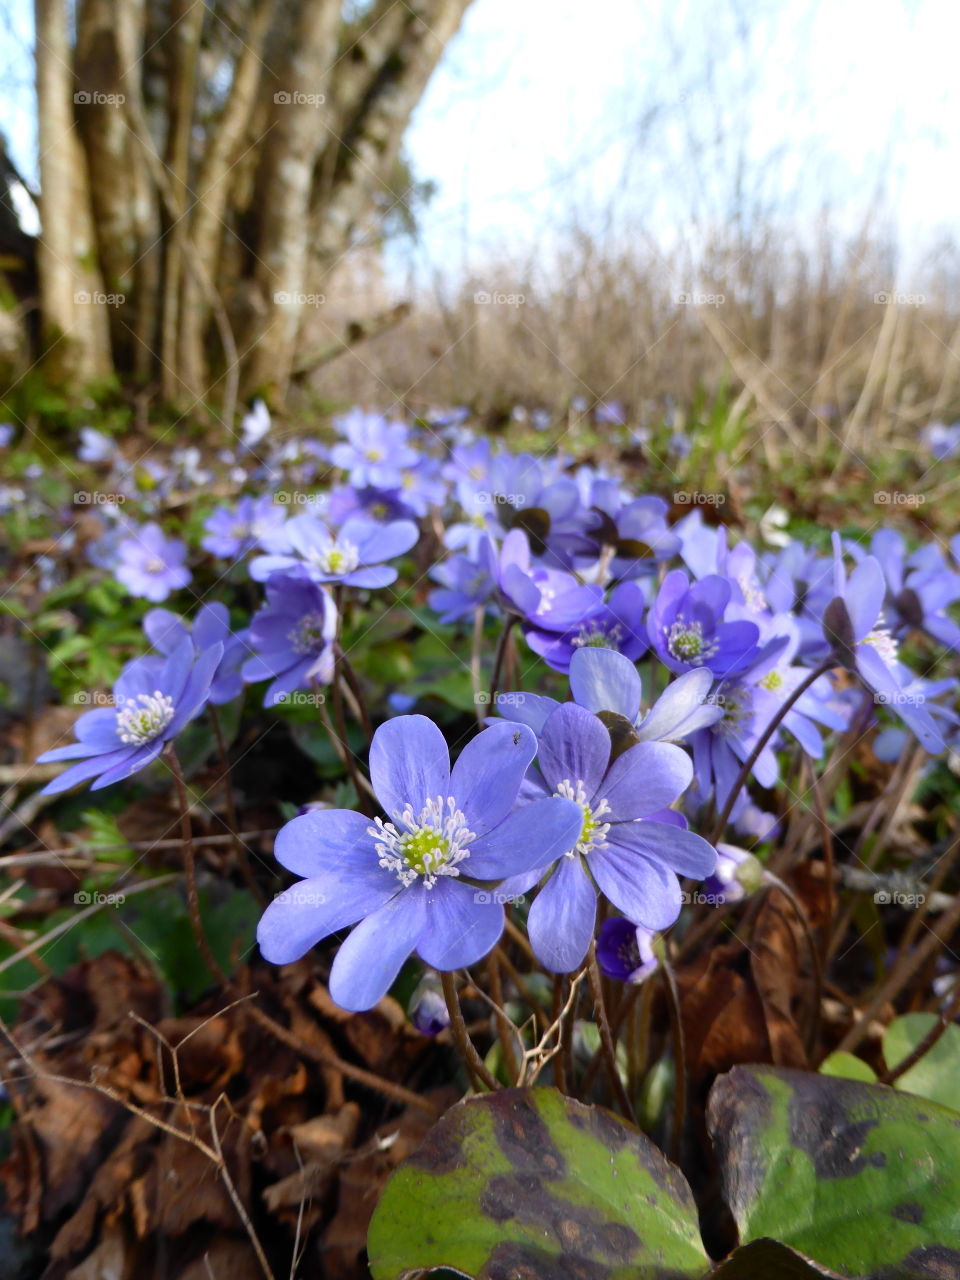 Anemones in the forest